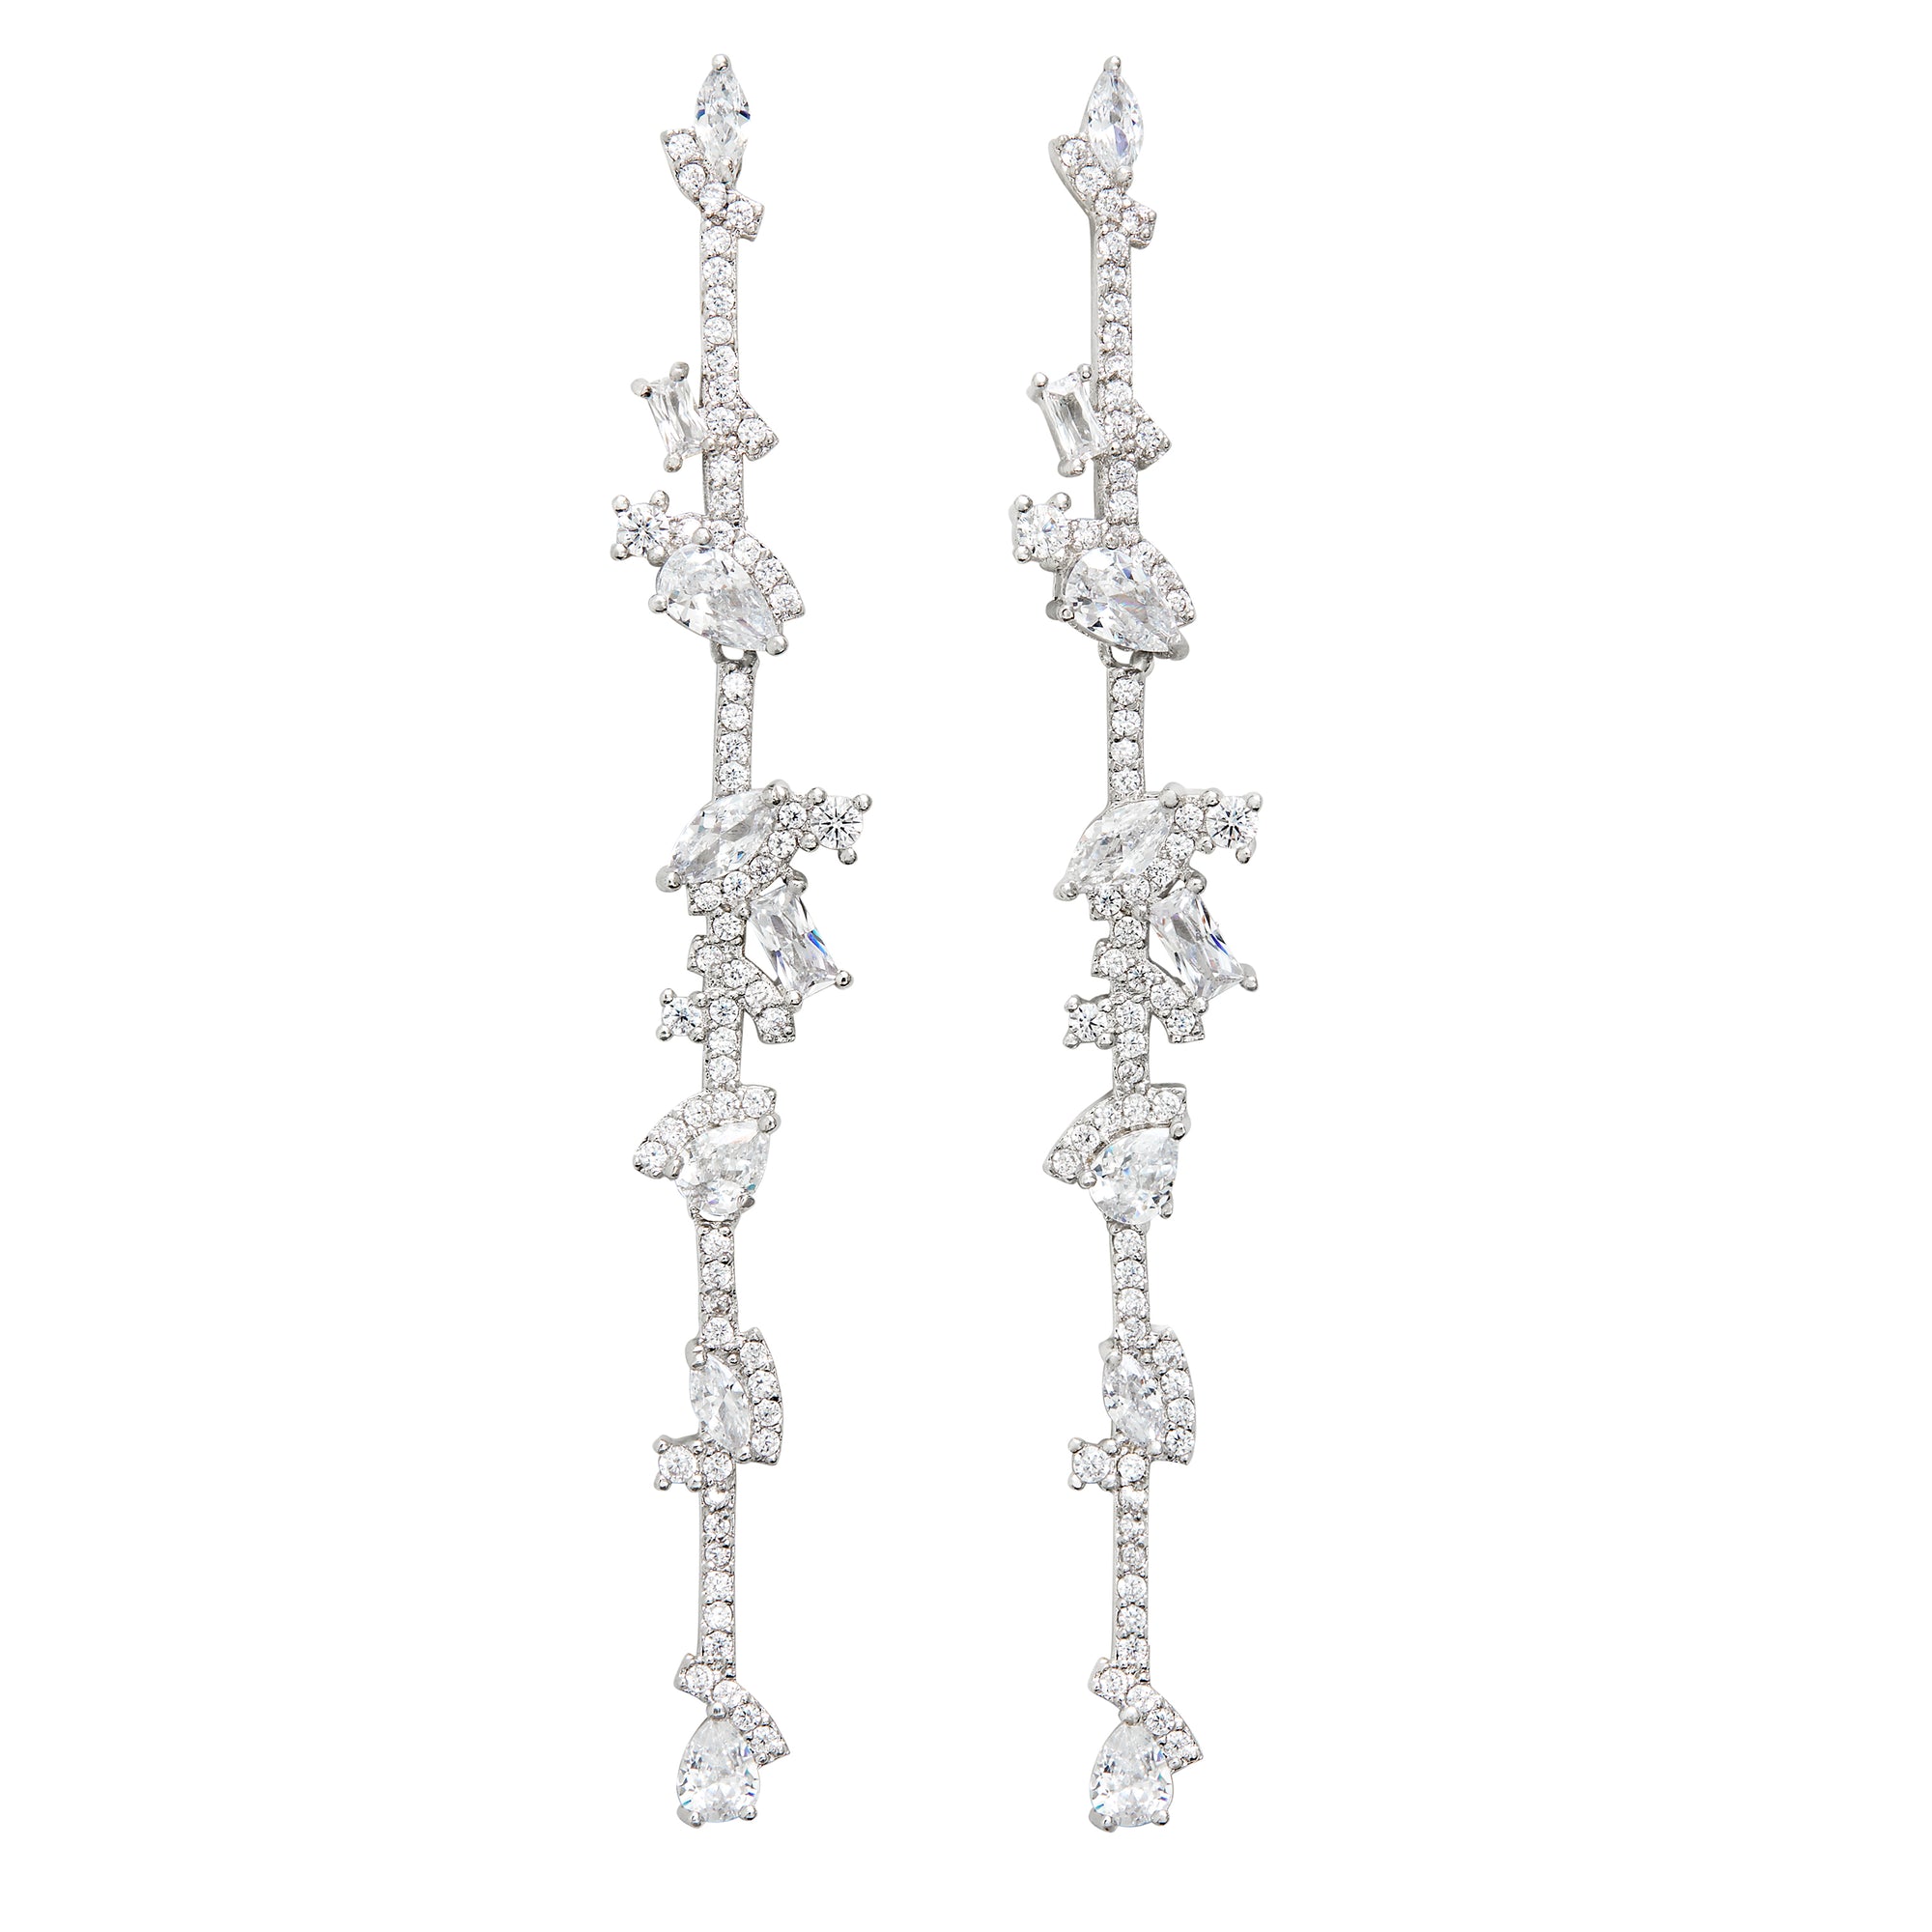 The FALLON STAGGERED STONE BAR DROP EARRINGS are made from plated brass and cubic zirconia.